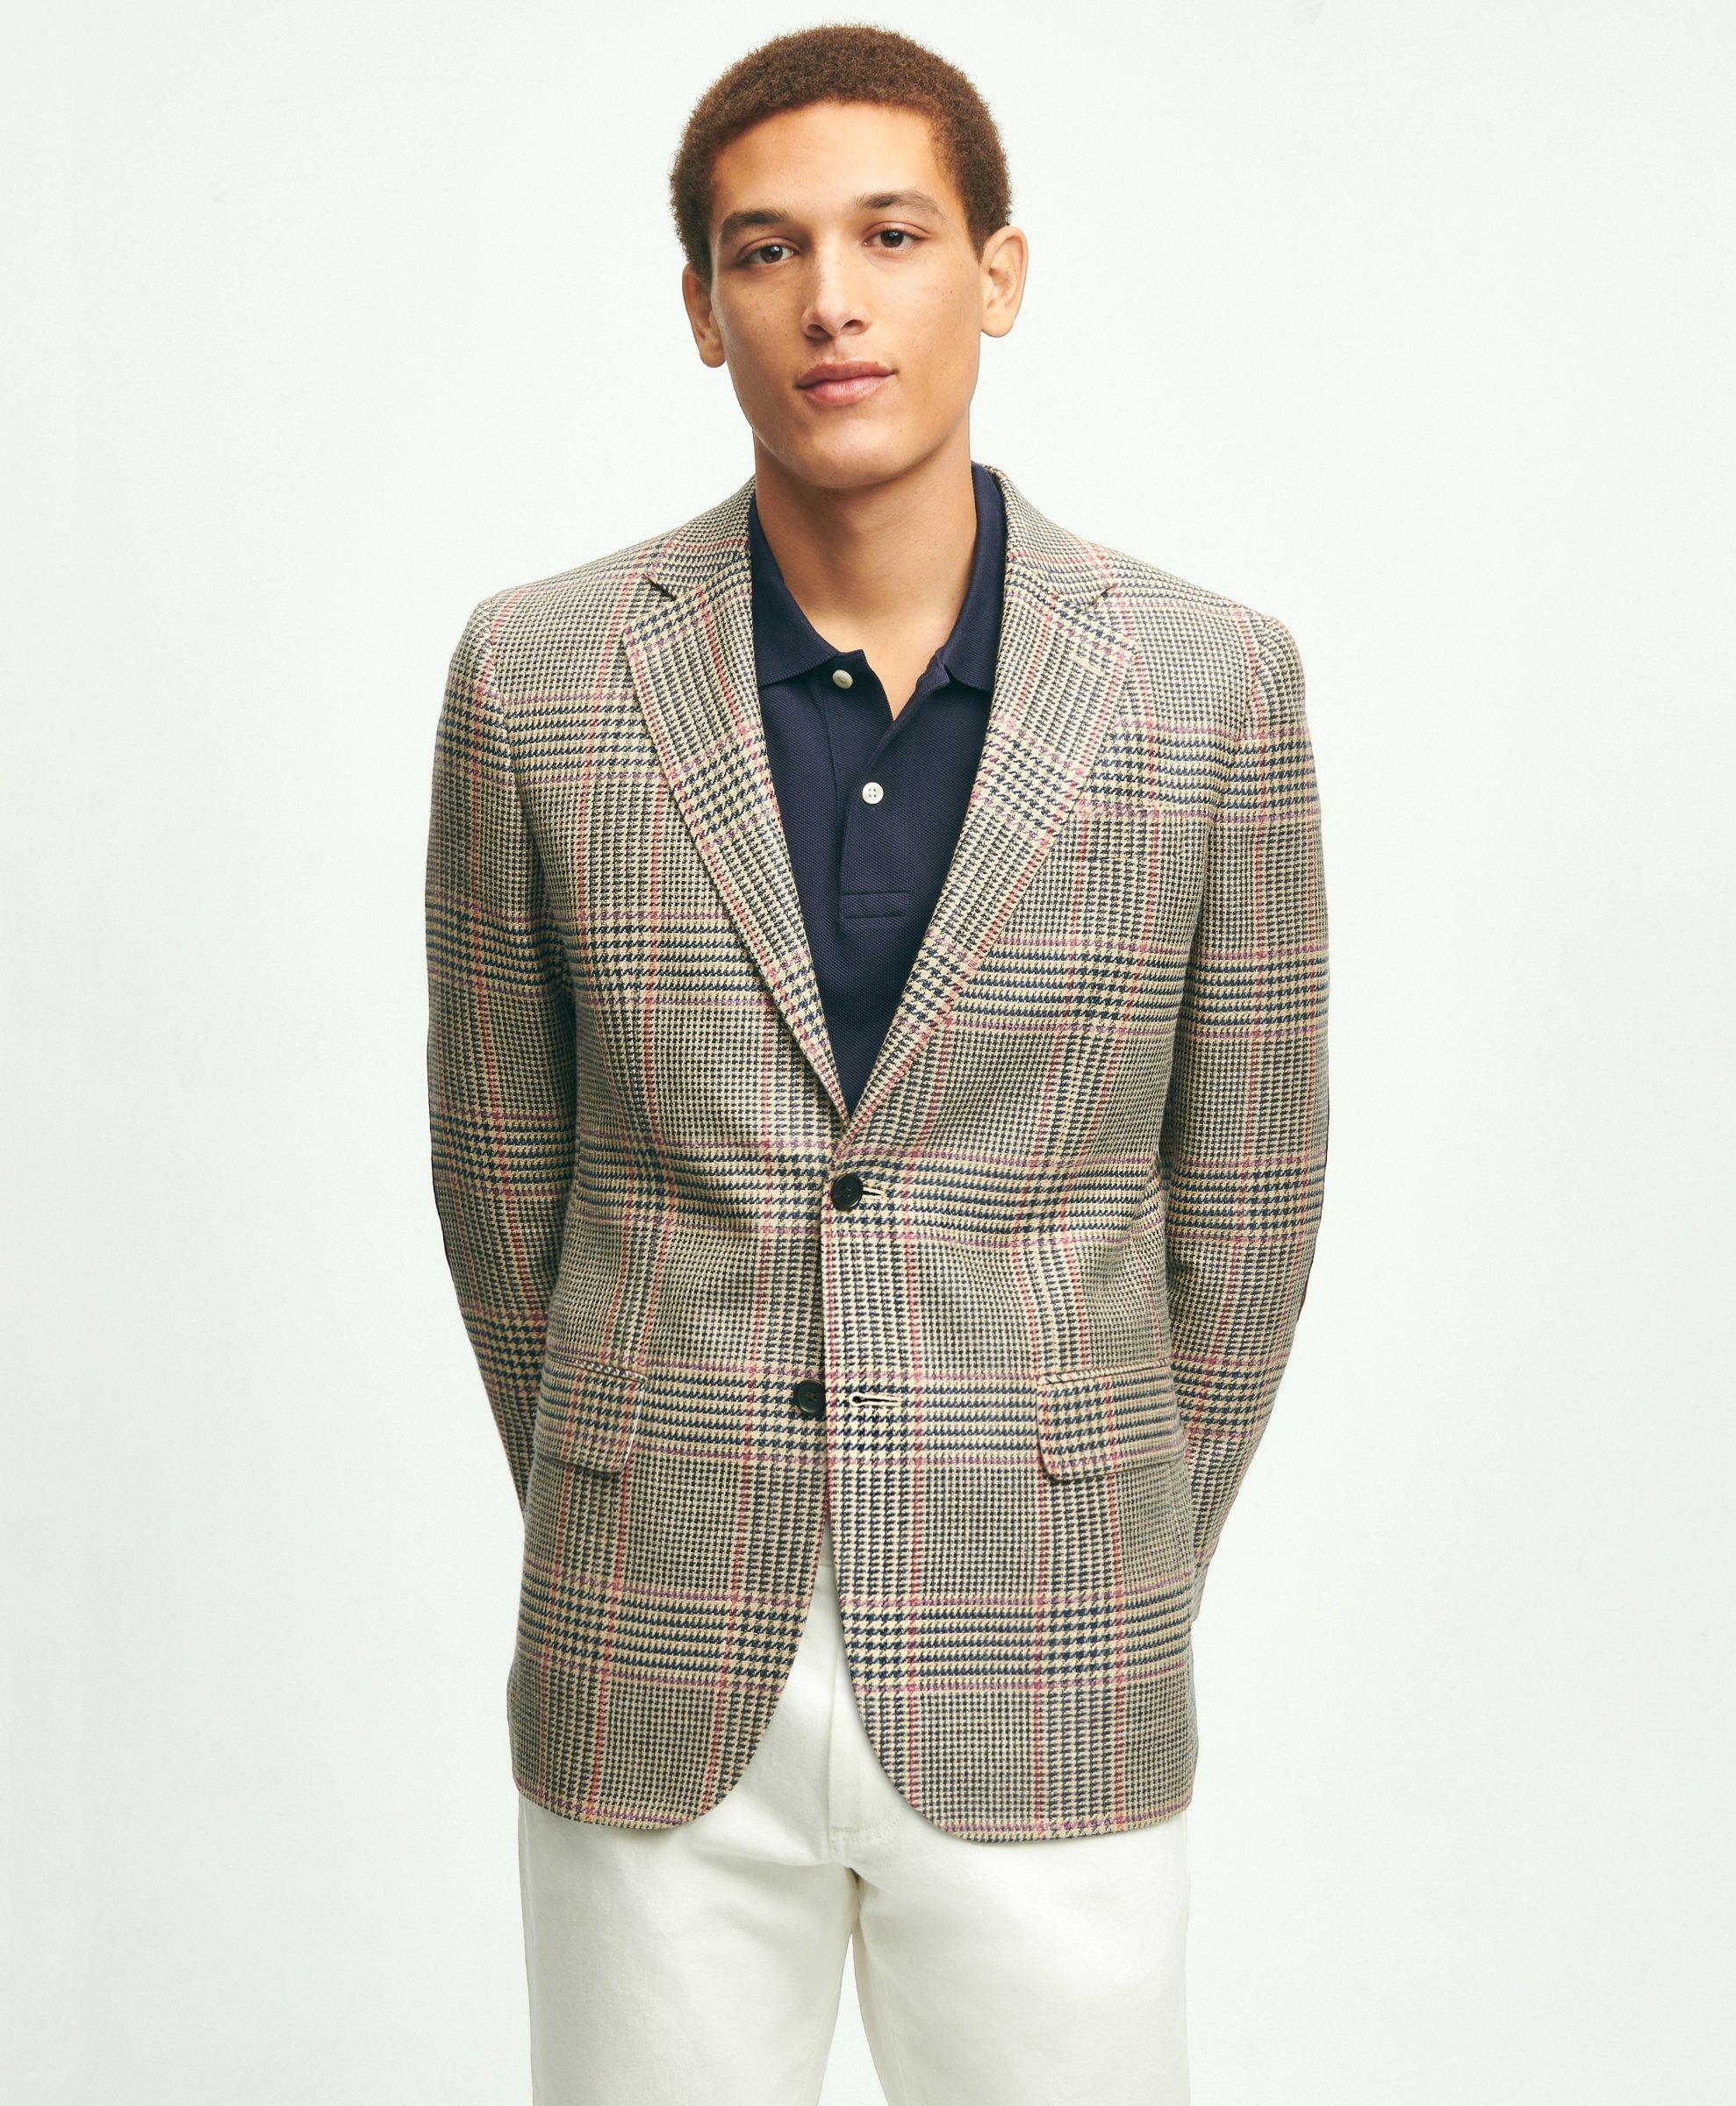 Mens Sport Coats with Elbow Patches